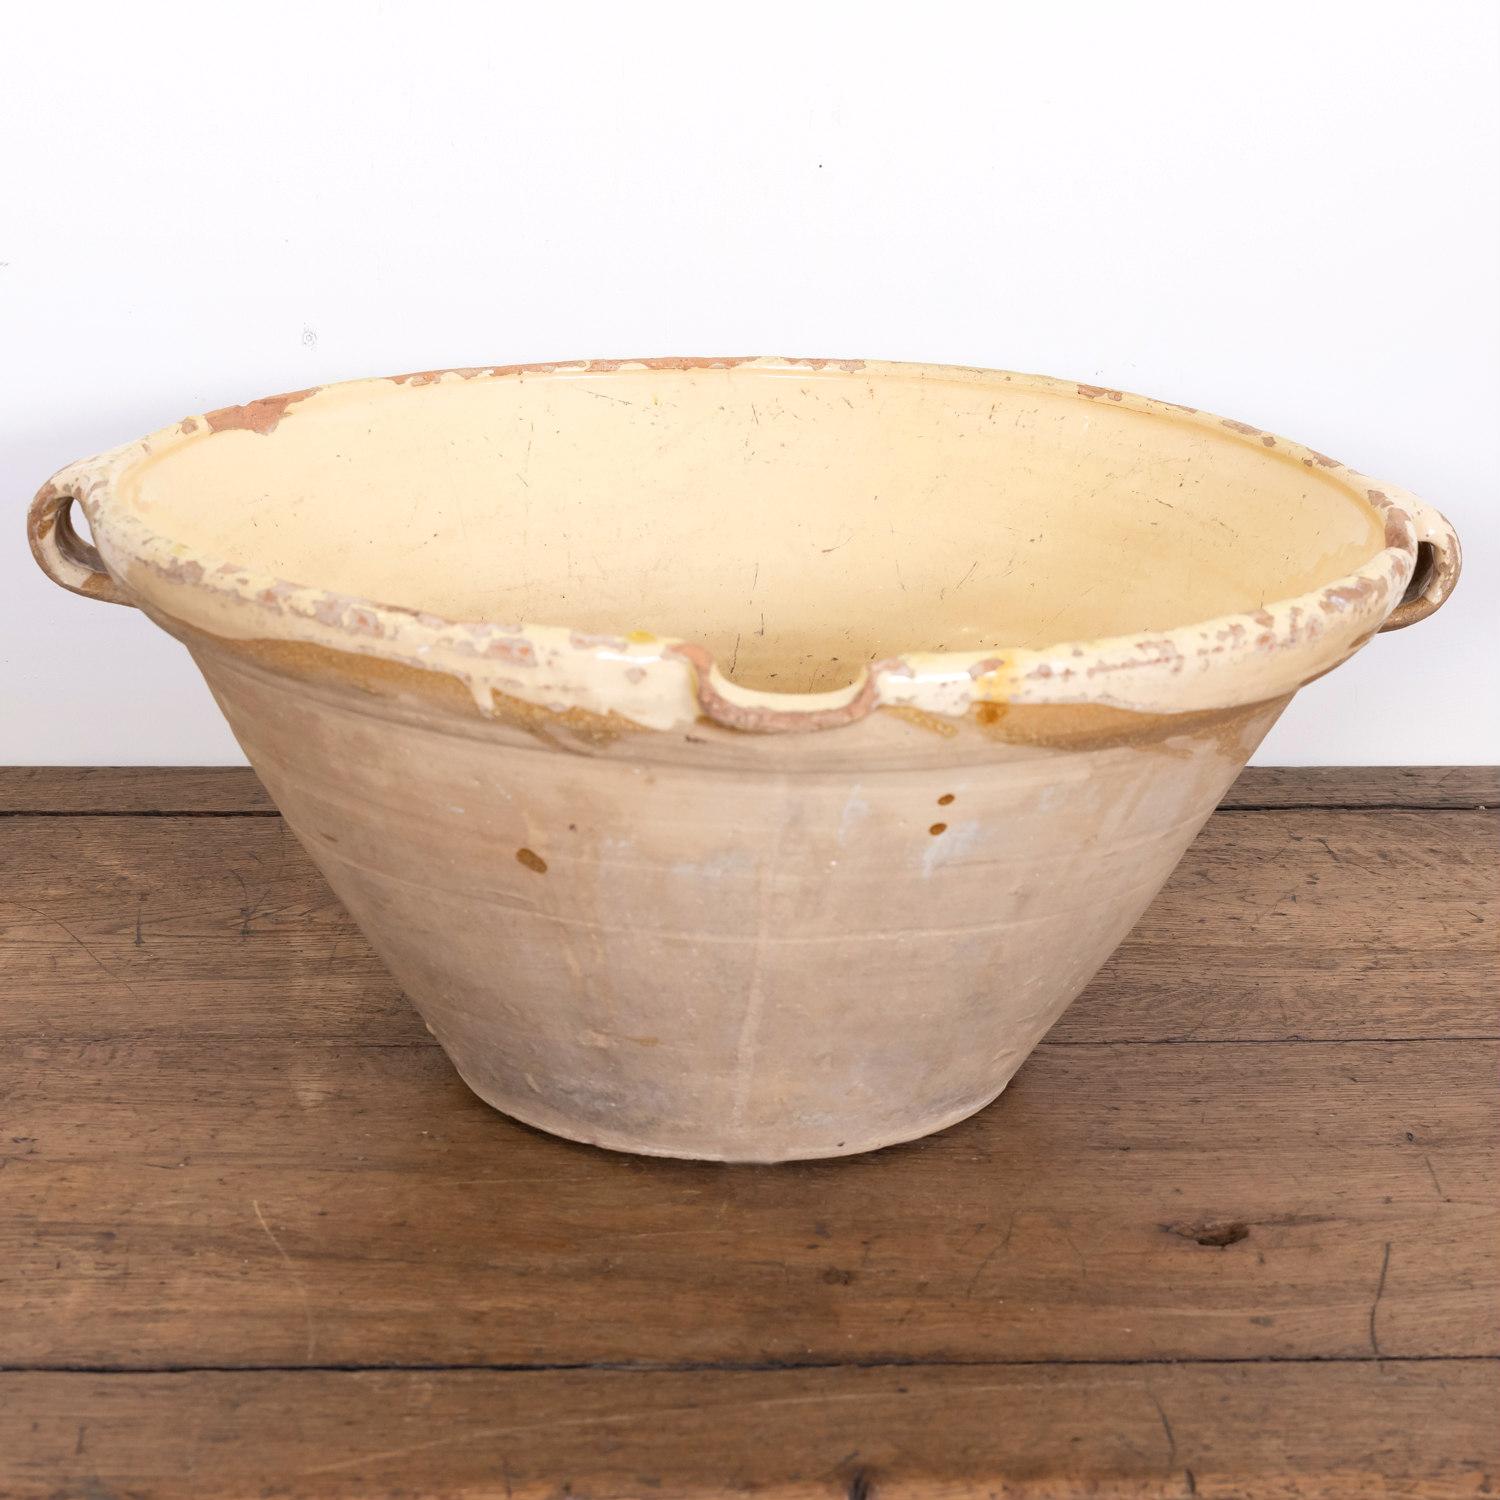 A large 19th century French terracotta tian bowl complete with both handles and pouring spout having an unglazed exterior and a beautiful pale yellow glaze to the interior and lip, circa 1880s. Earthernware tian bowls like this are considered